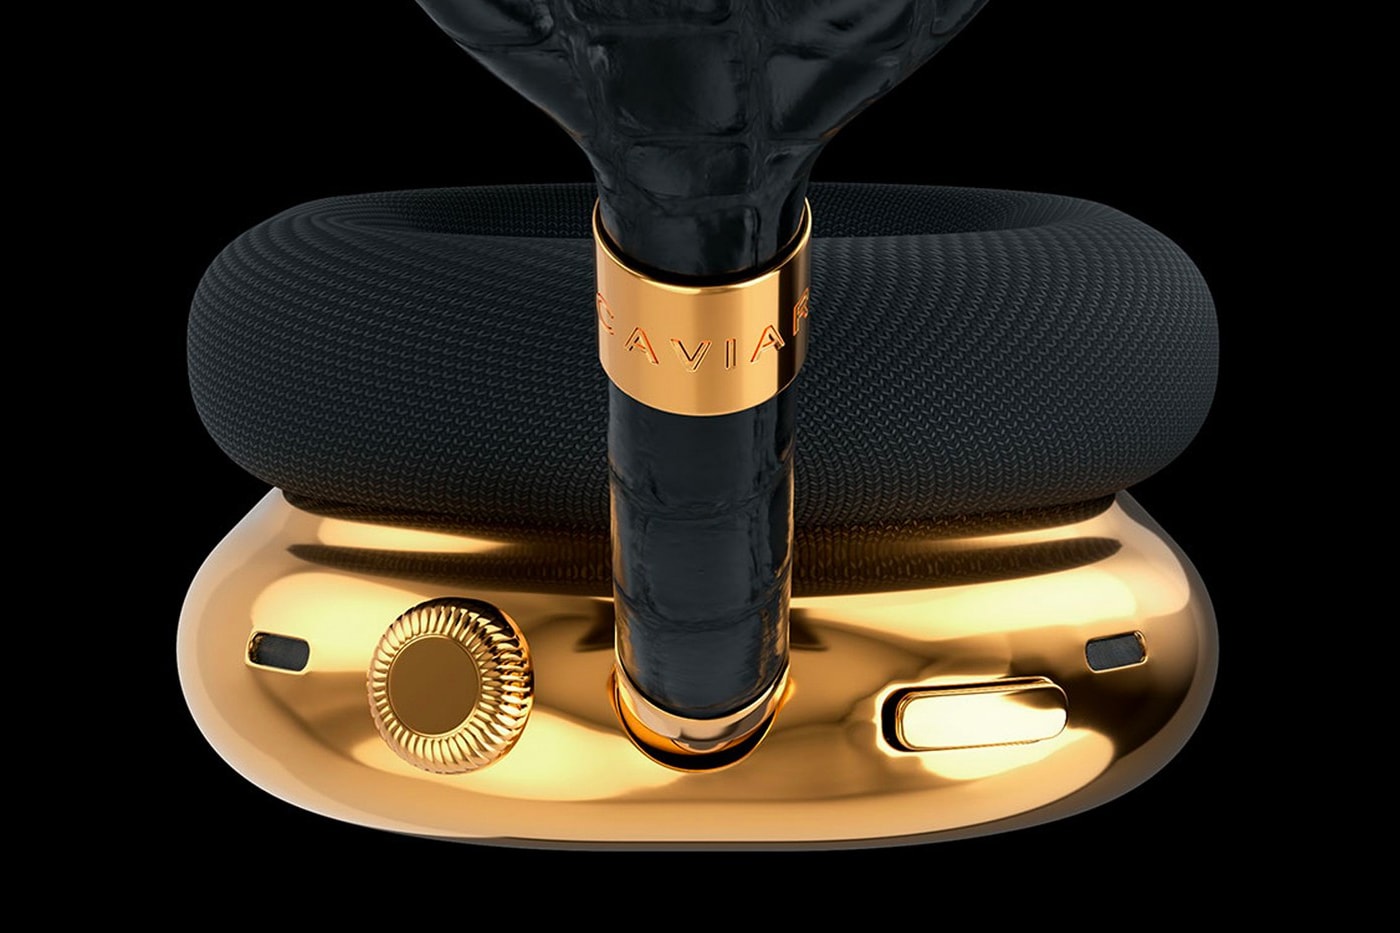 Buy New Luxury Air Pod Pro Case devices online